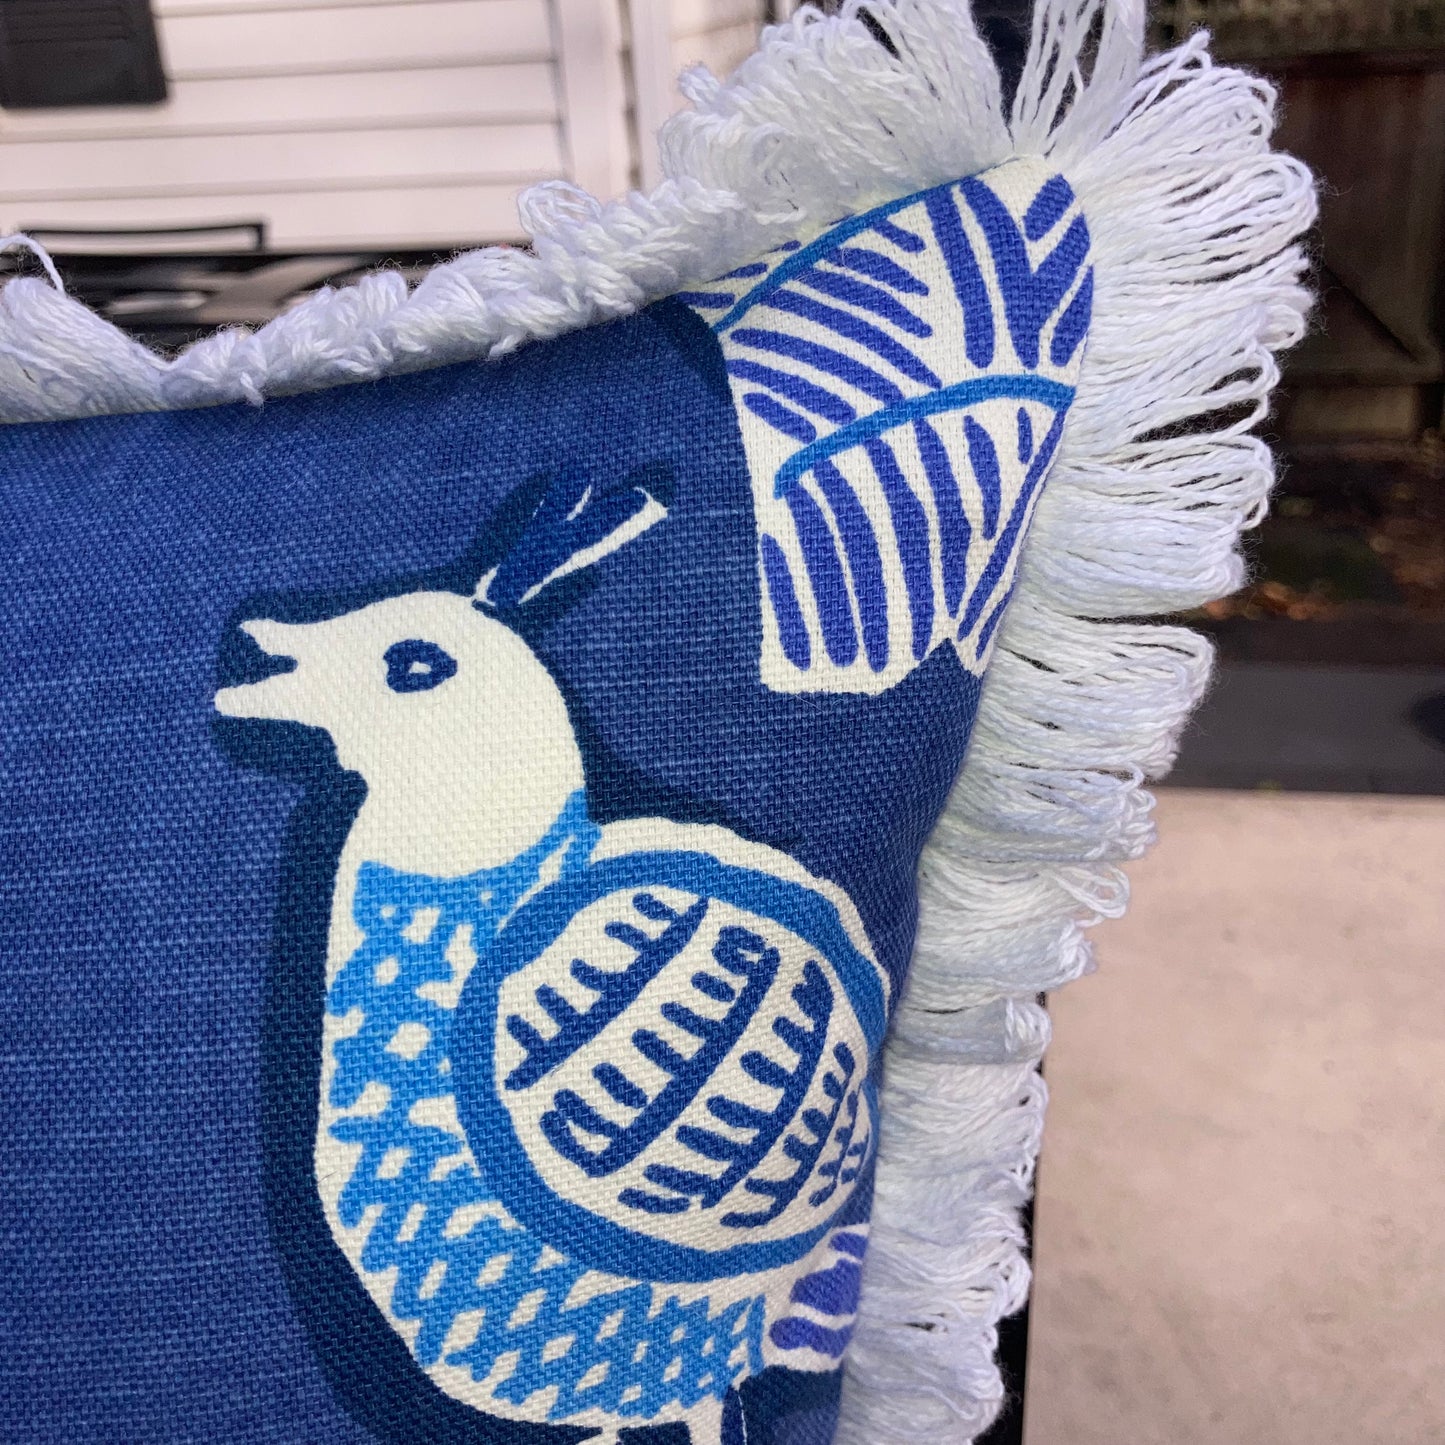 Goa Blue and White Square Designer Pillow Trim 22 X 22 Square with Down Feather Insert